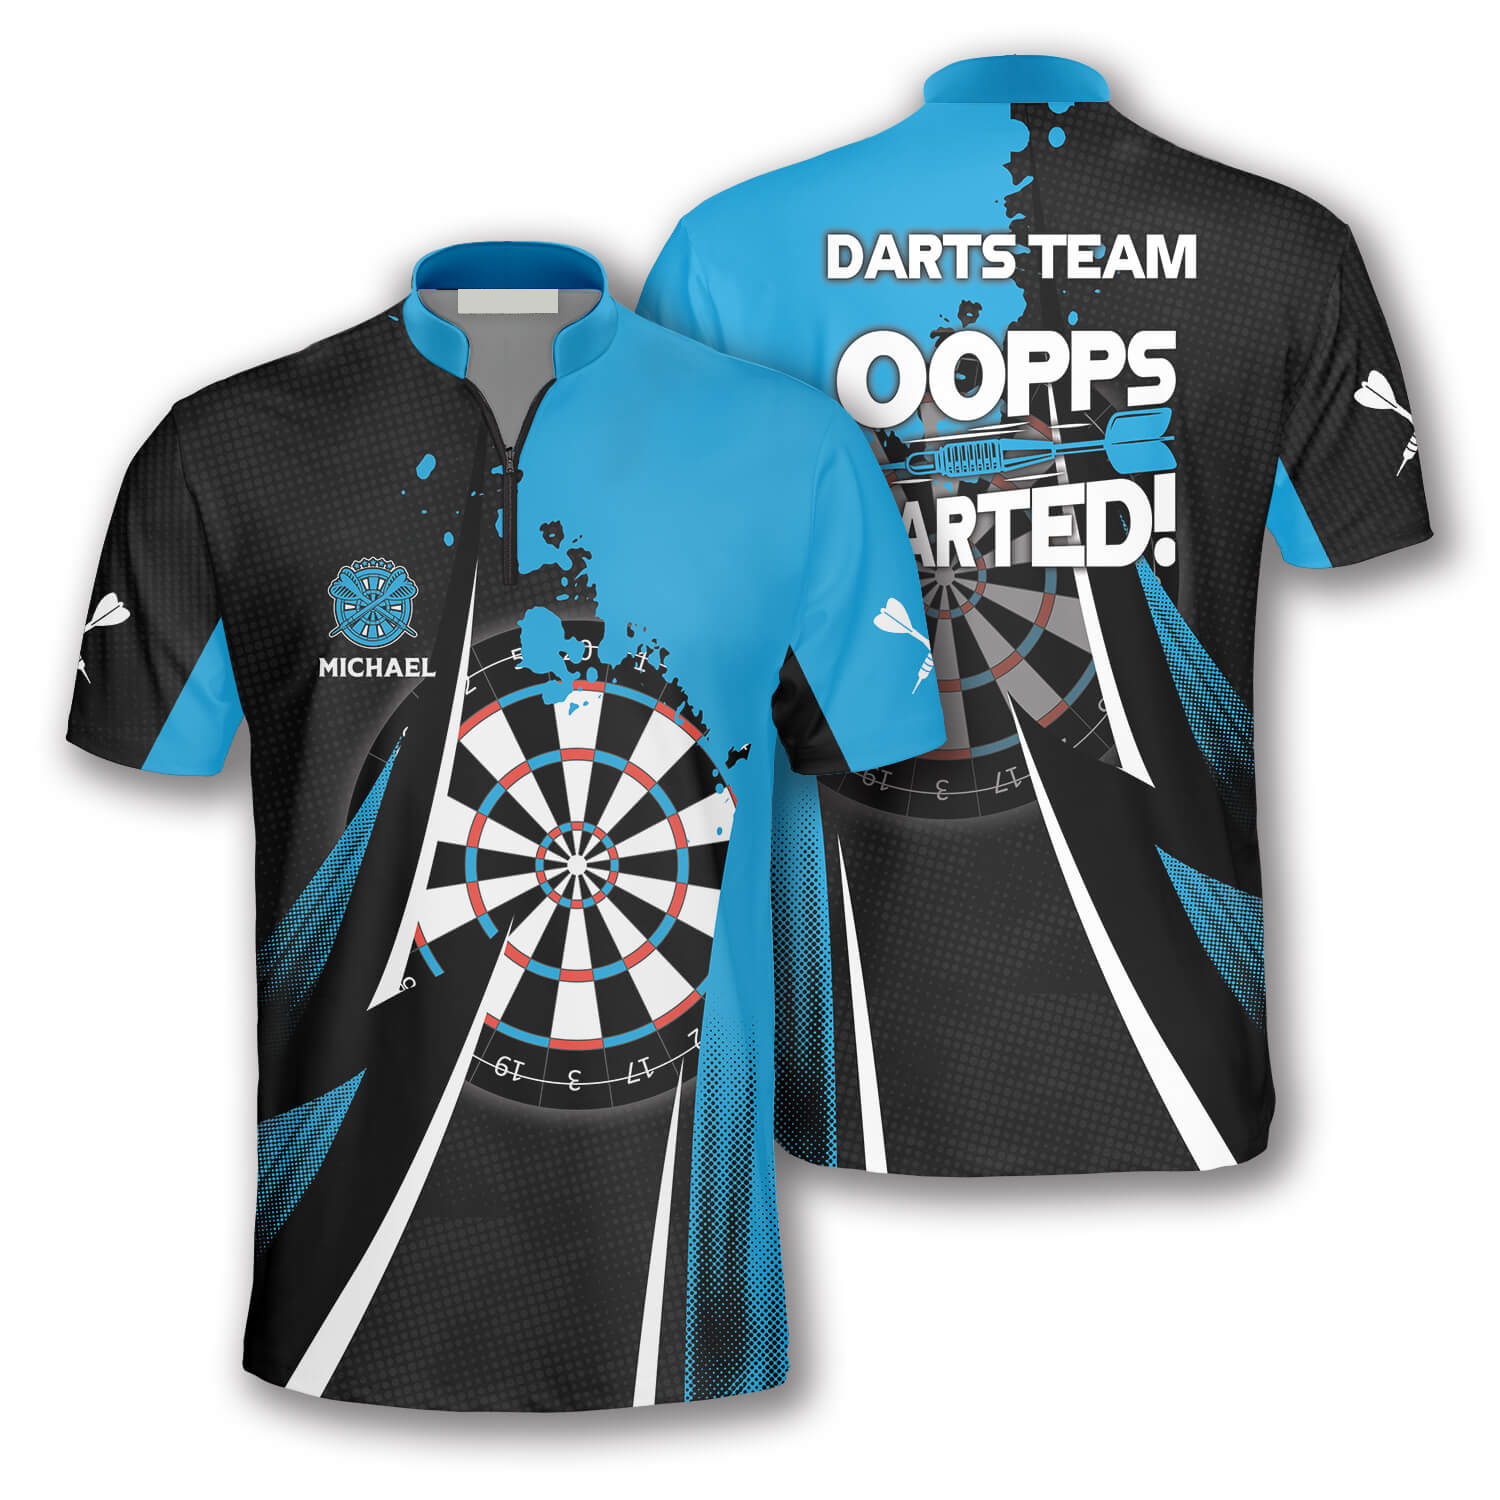 Oopps I Darted Custom Darts Jerseys for Men/ Personalized Name Dart Jersey 3D Shirt